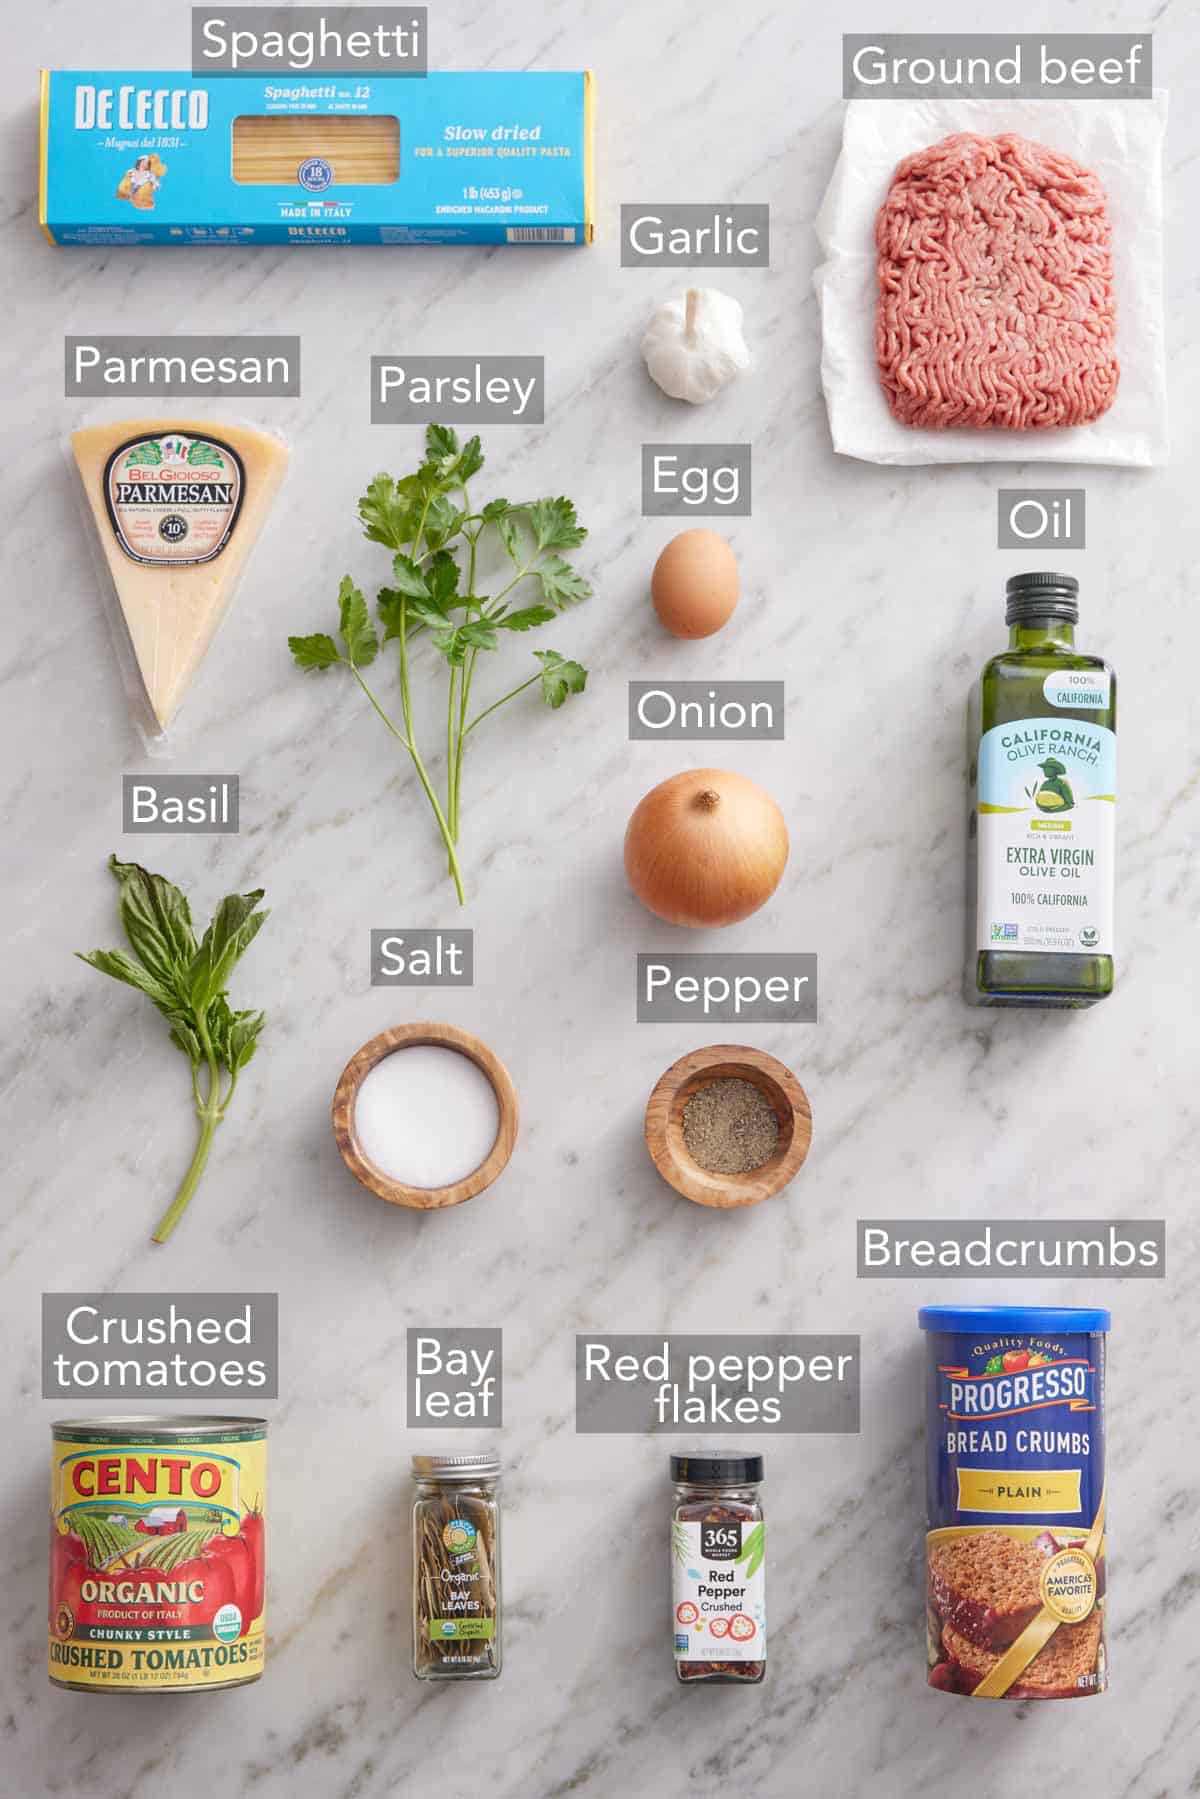 Ingredients needed to make spaghetti and meatballs.